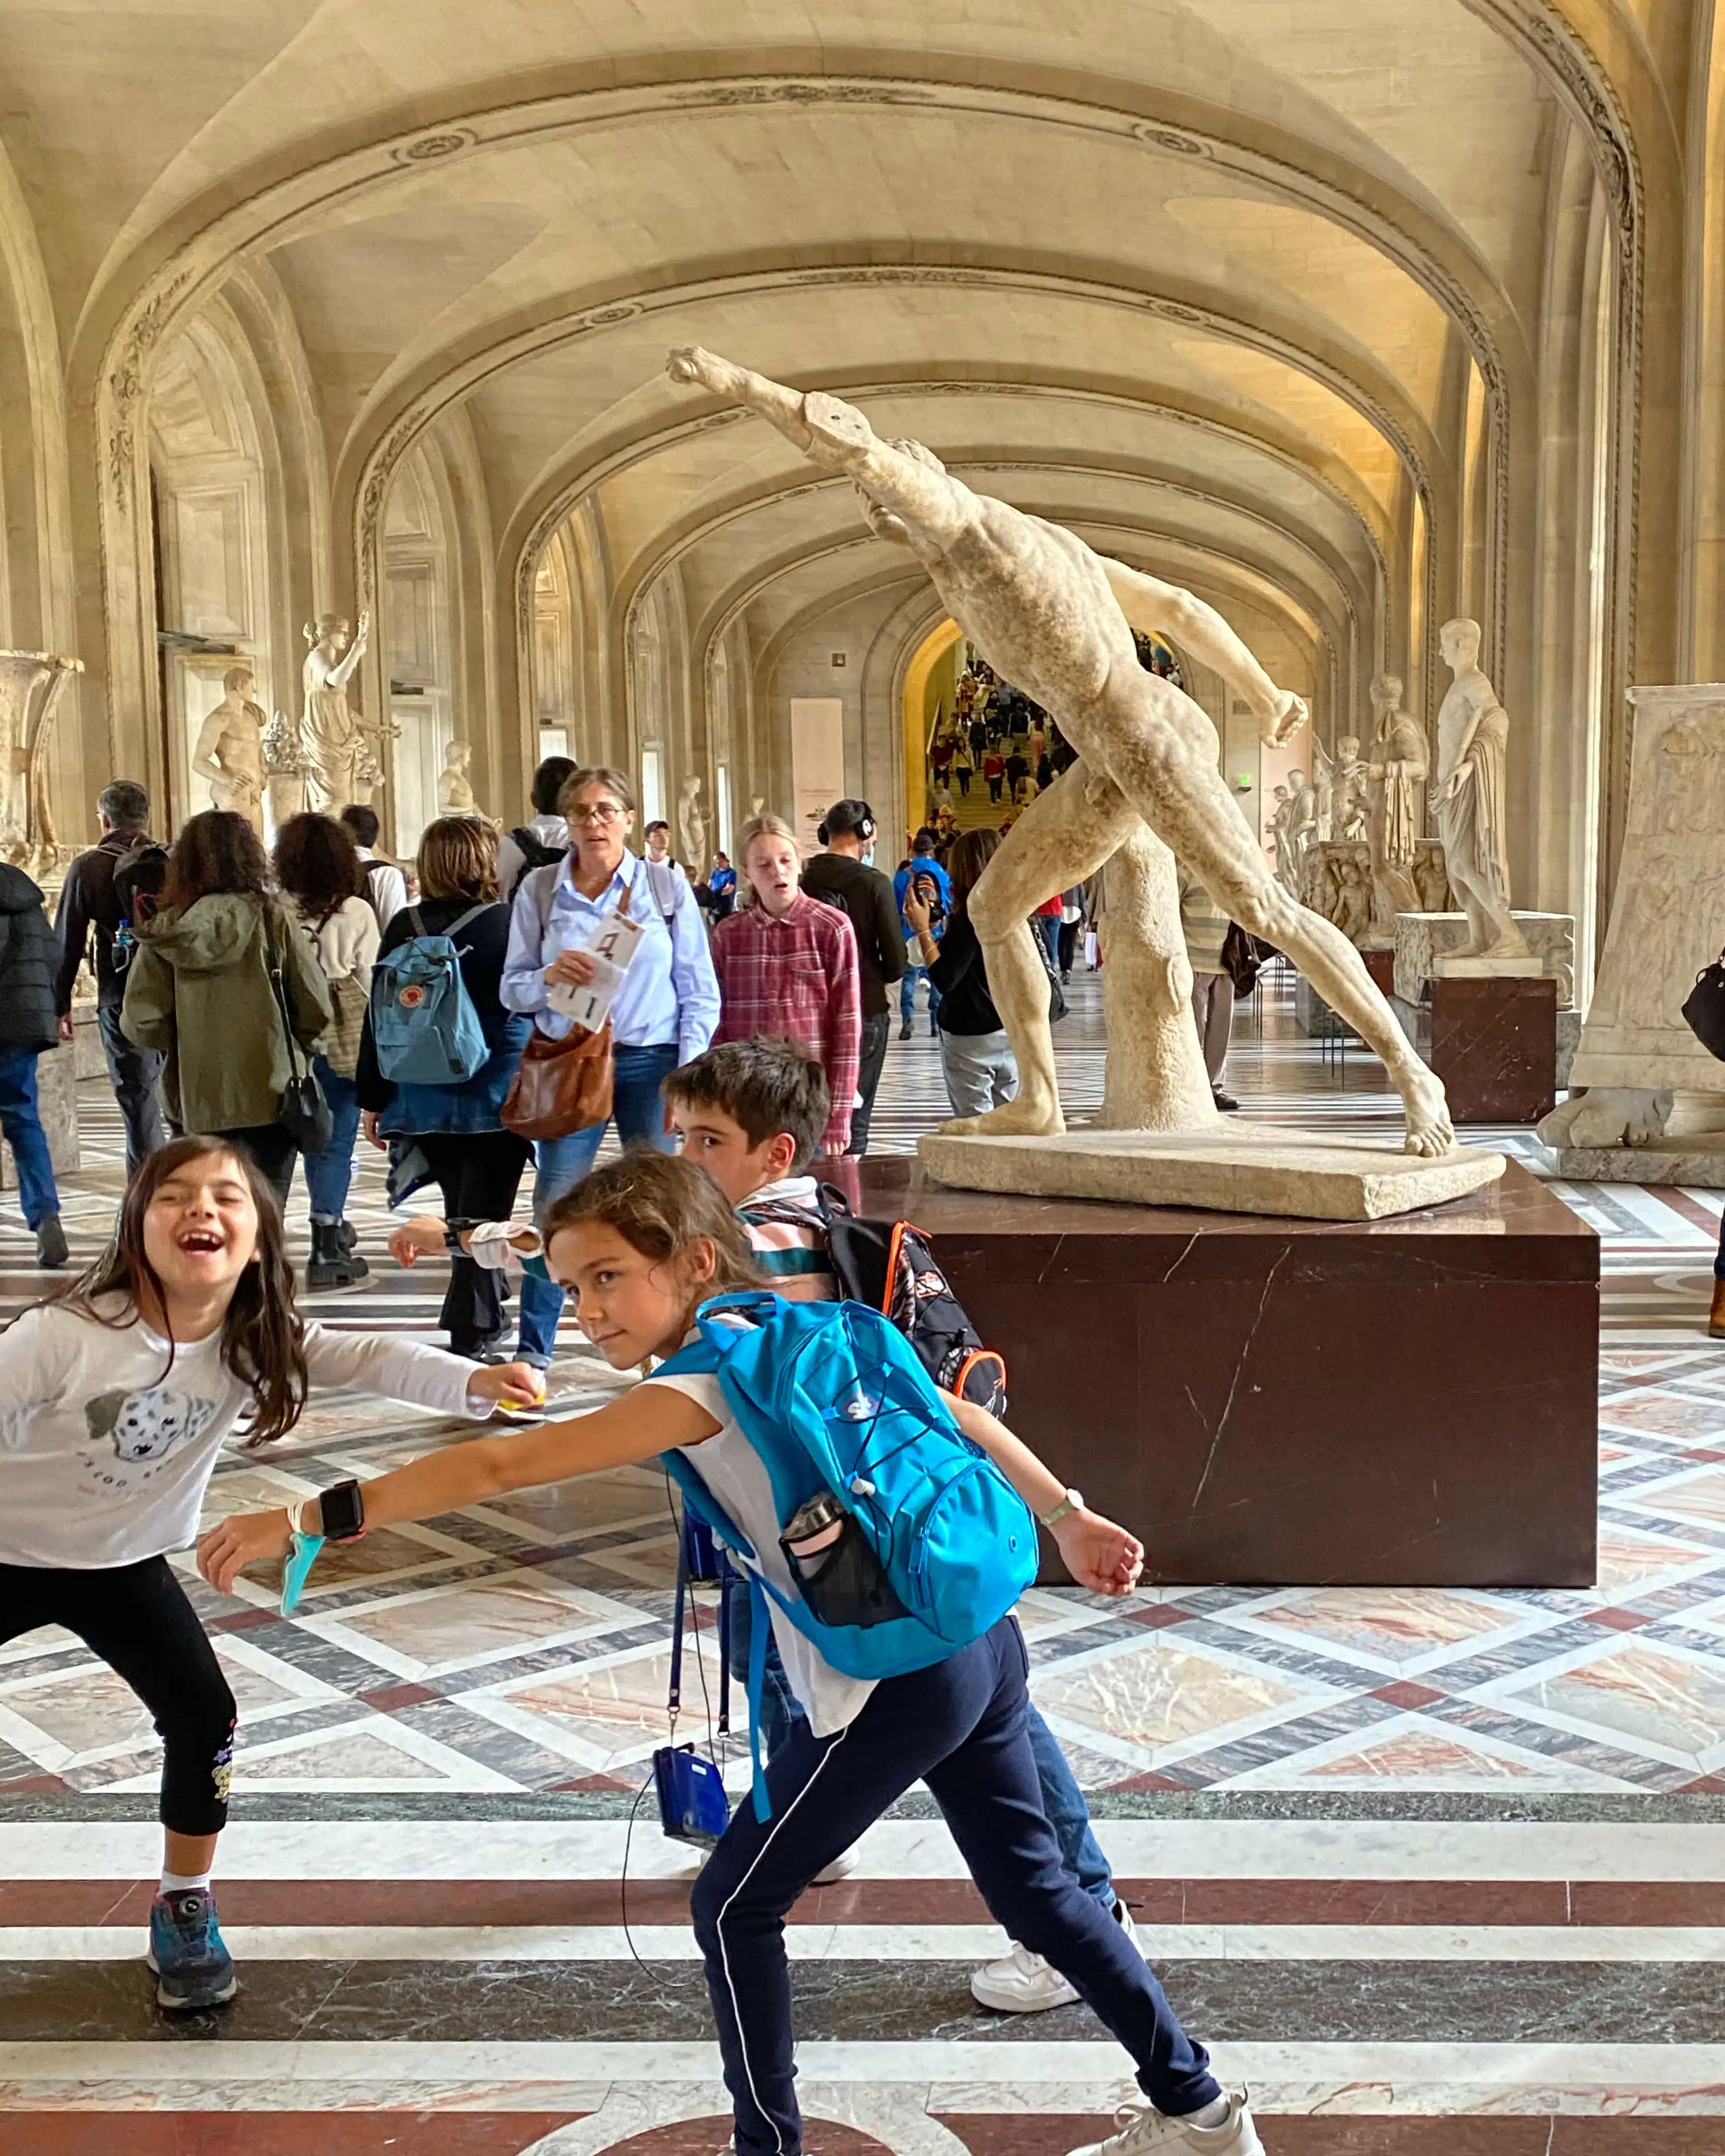 Children try to mimic the pose of an ancient Greek statue in Louvre, Paris